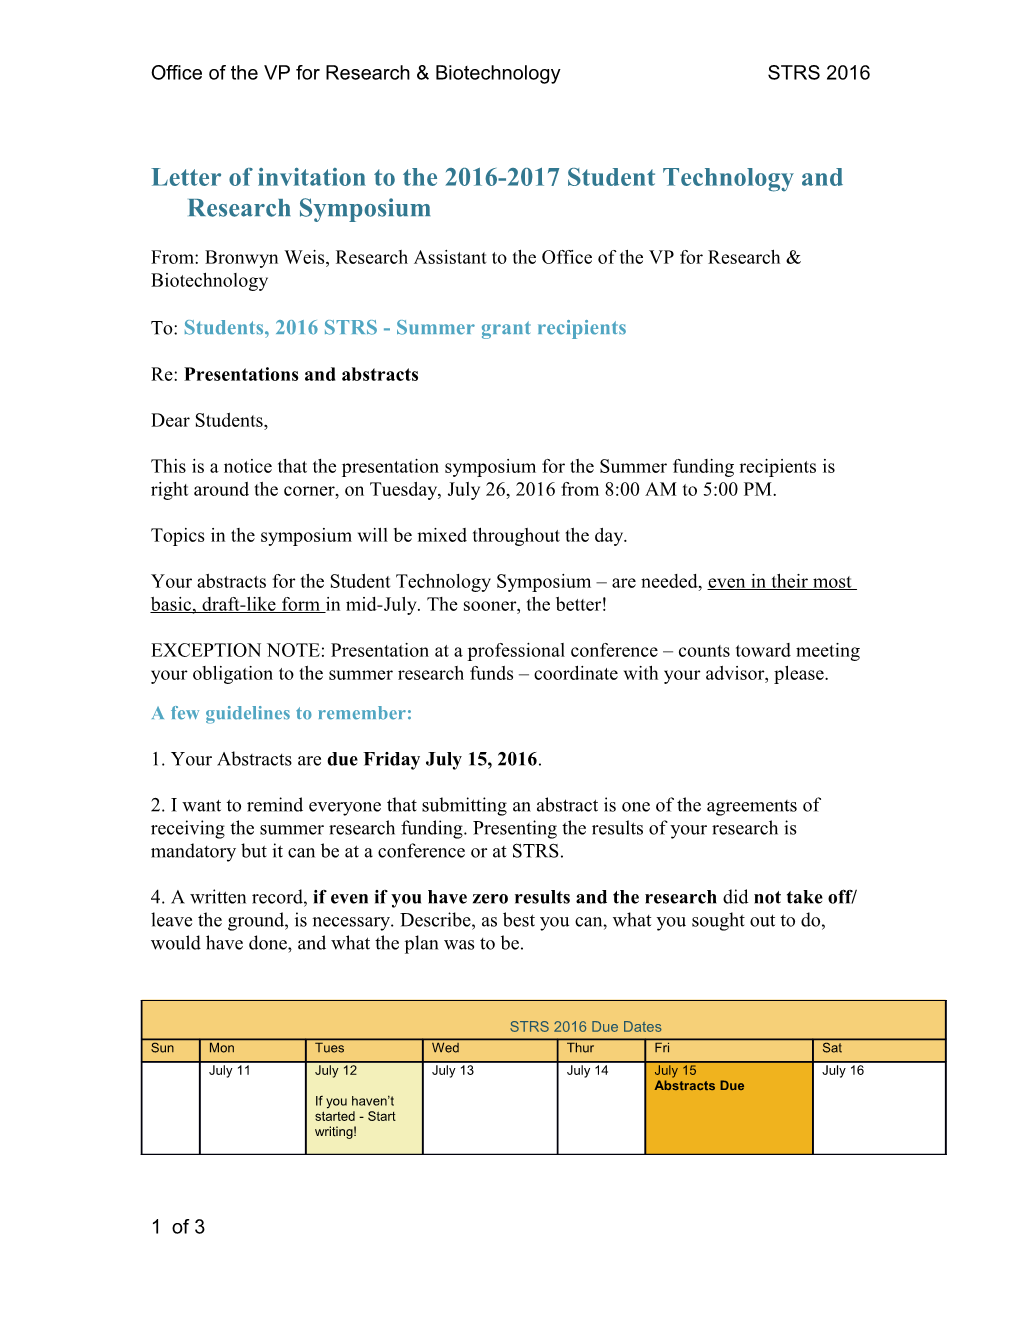 Letter of Invitation to the 2016-2017 Student Technology and Research Symposium